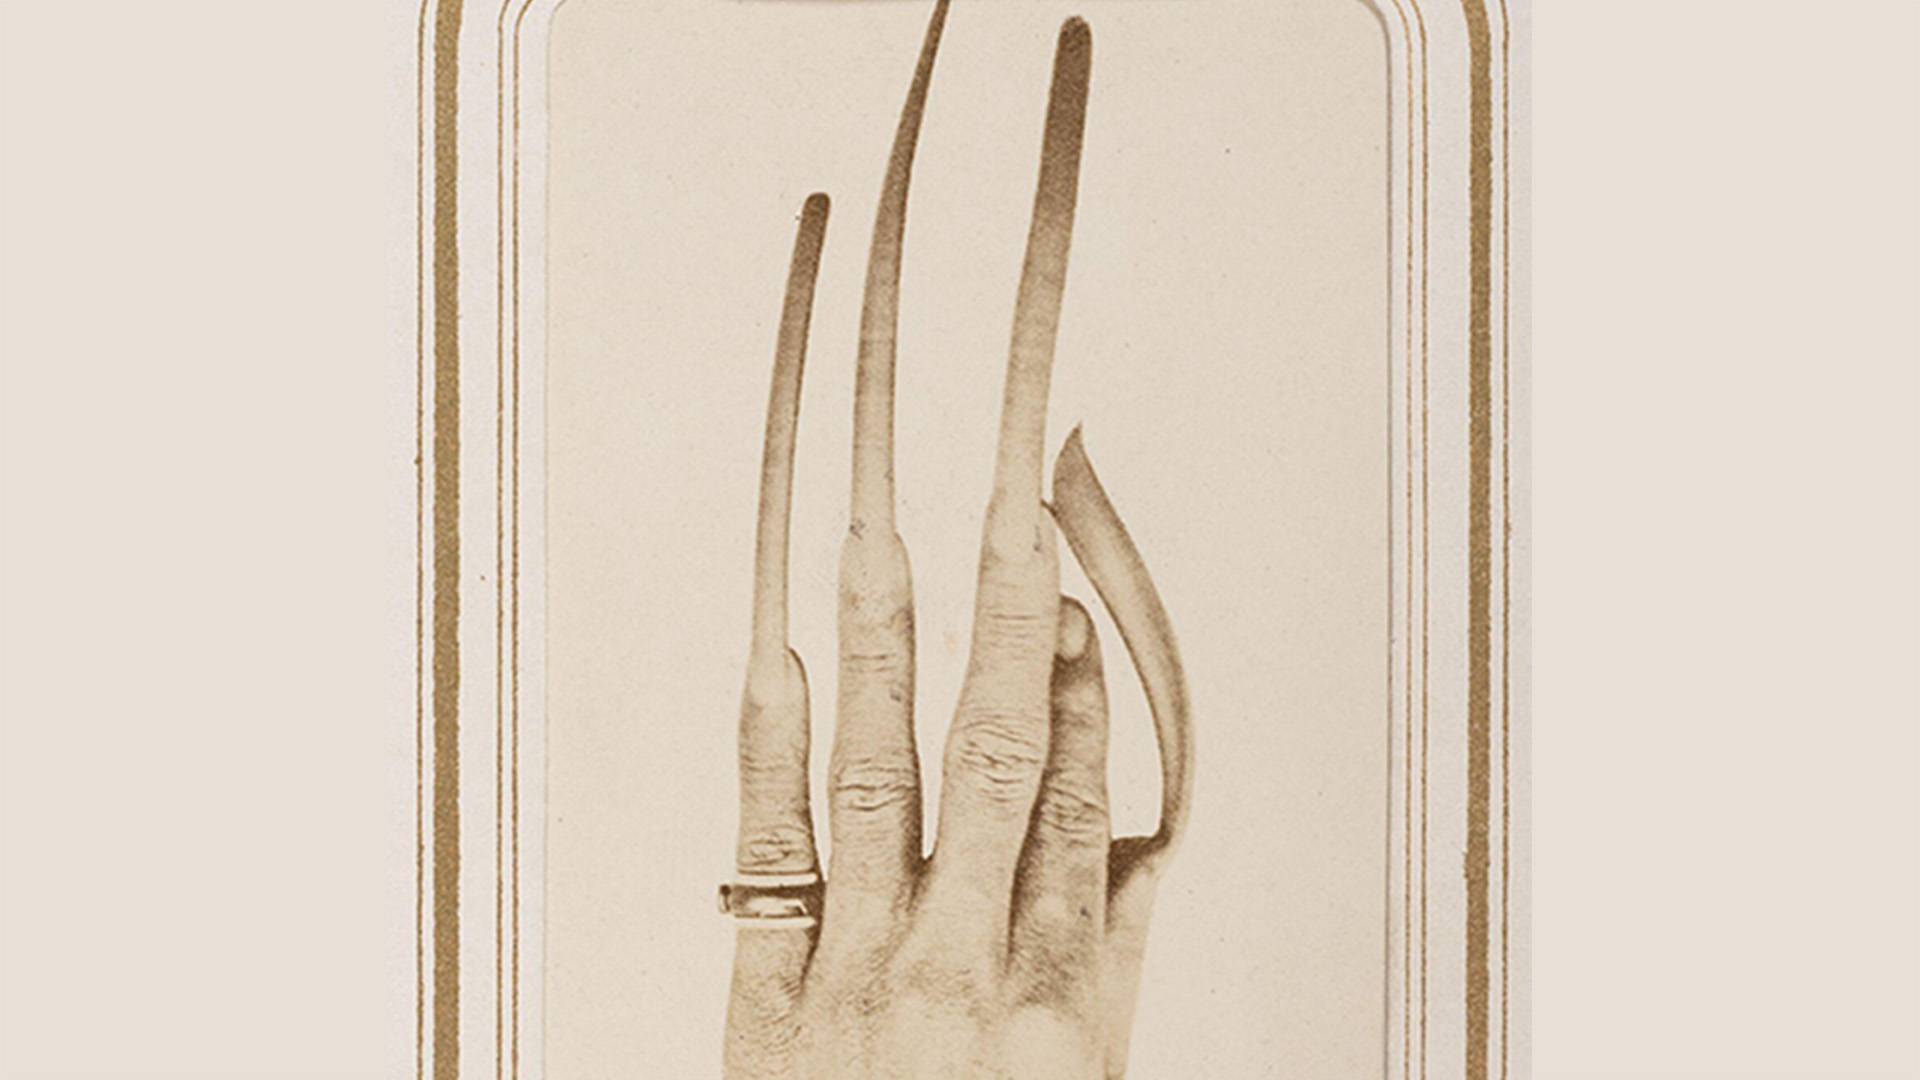 Photograph of a hand with extremely long fingernails